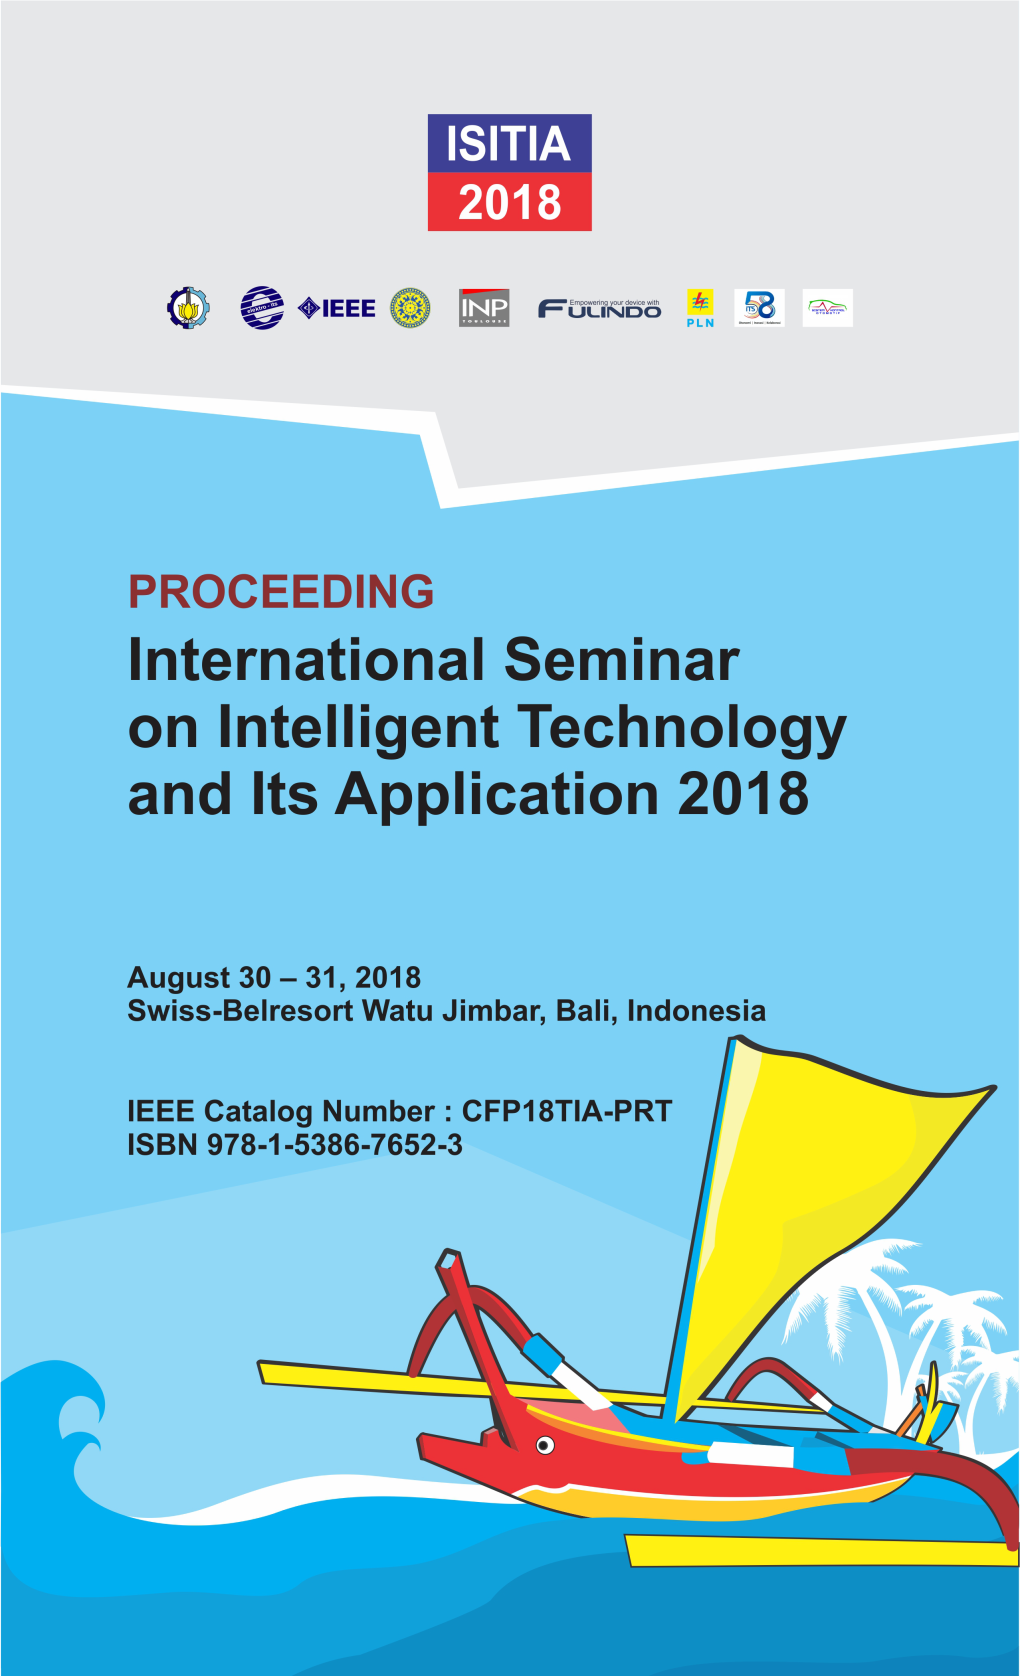 PROCEEDING 2018 International Seminar on Intelligent Technology and Its Application ISITIA 2018 August 30